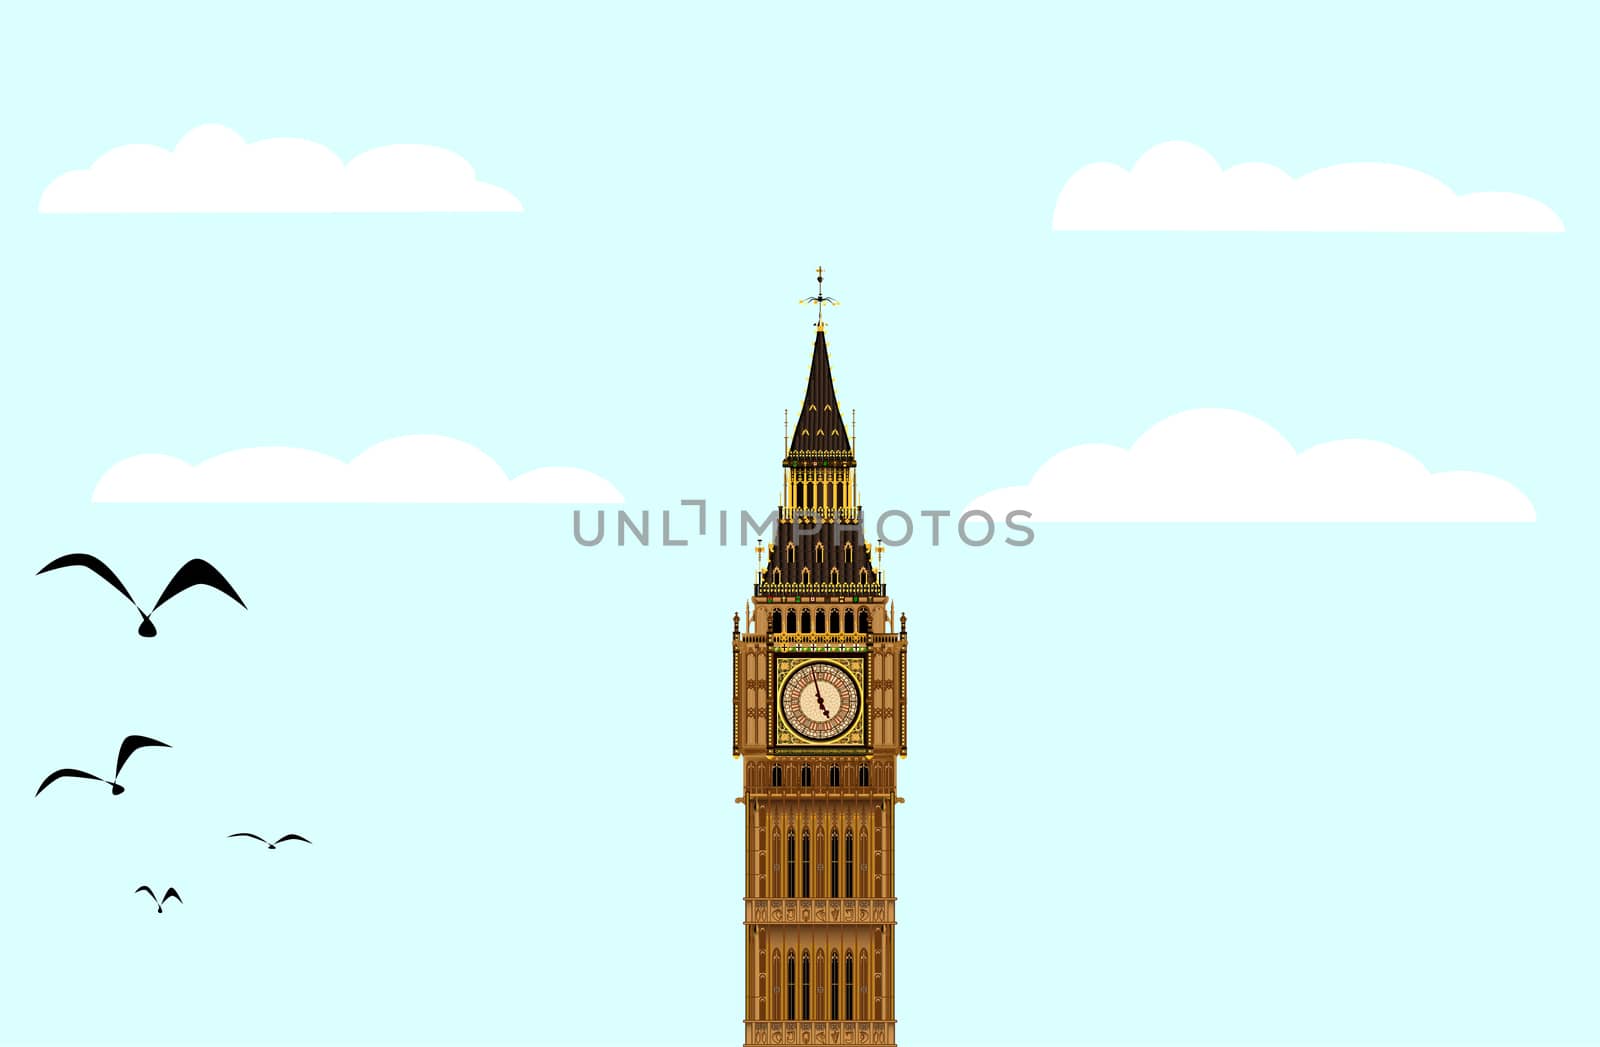 The London landmark Big Ben Clocktower at dawn against a blue sky with birds and clouds